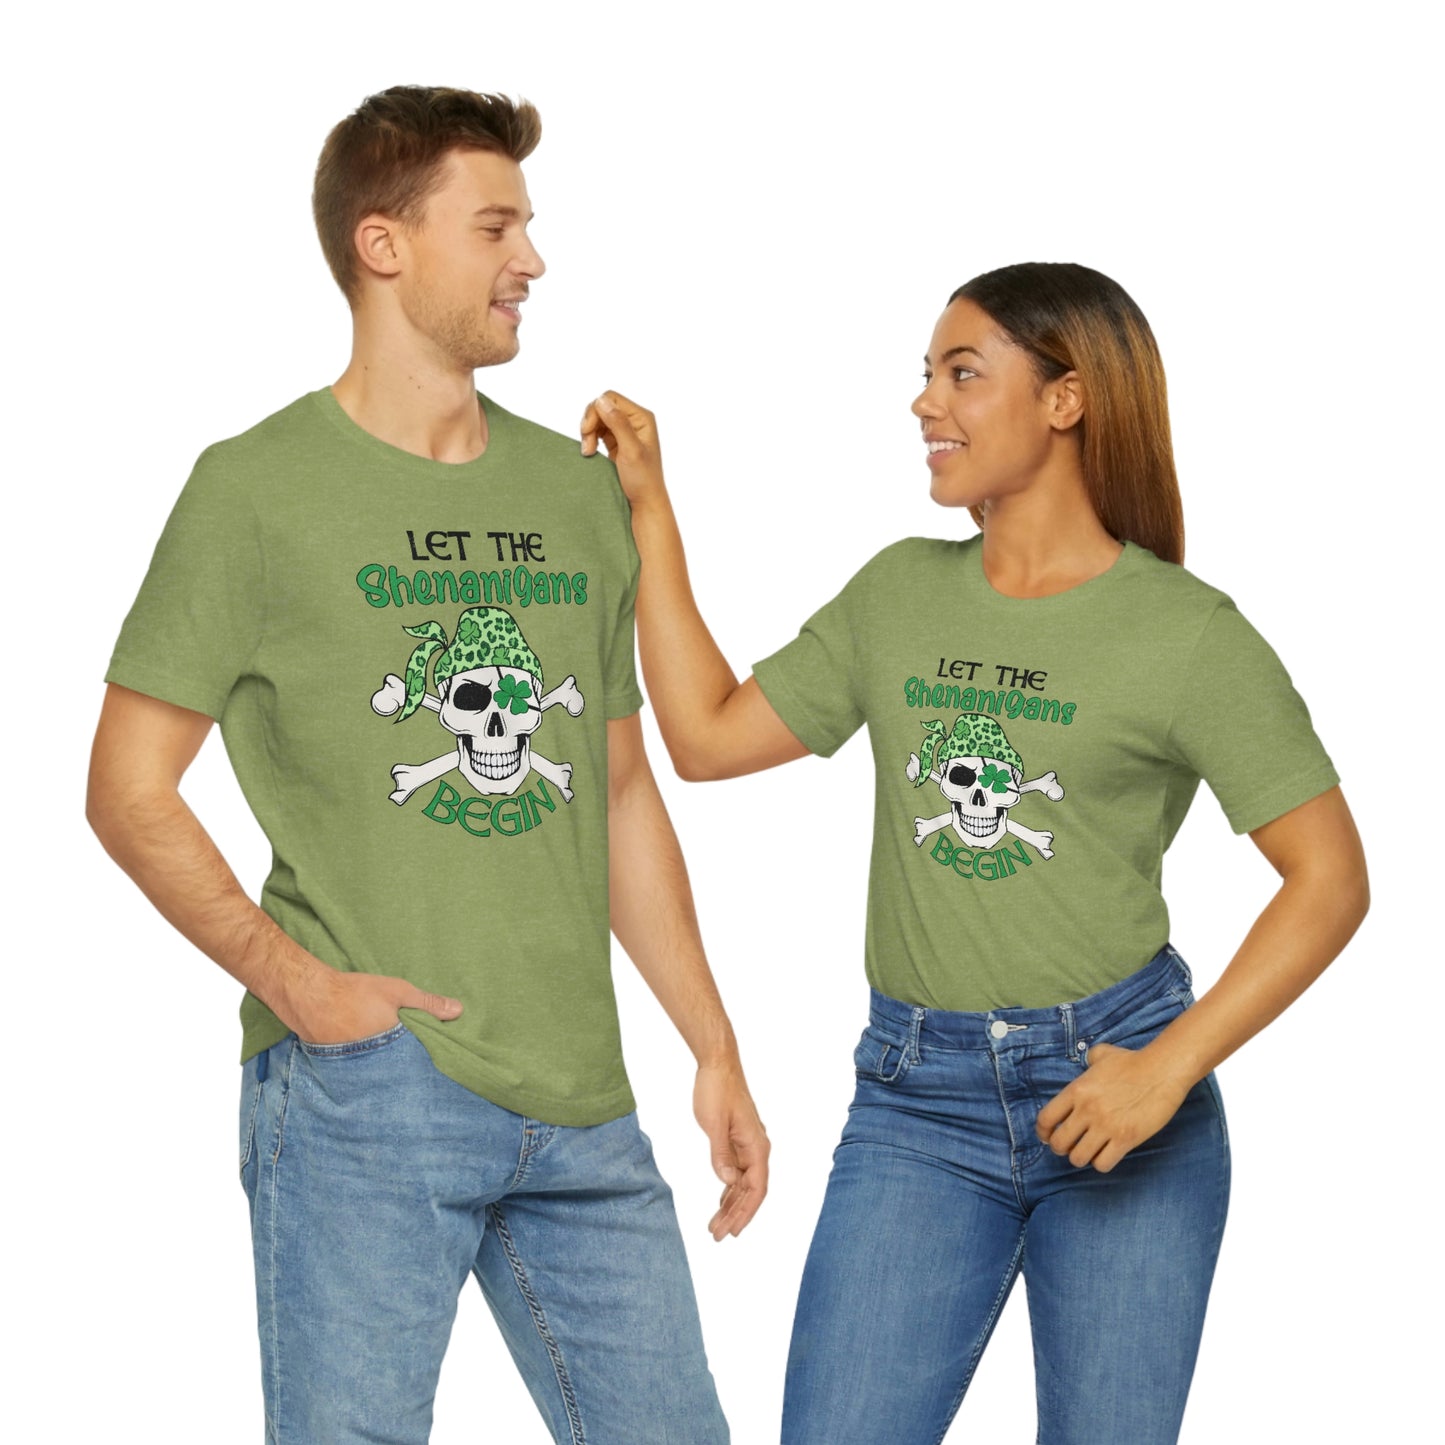 Let the Shenanigans Begin St. Patrick's Day Unisex Jersey Short Sleeve Tee